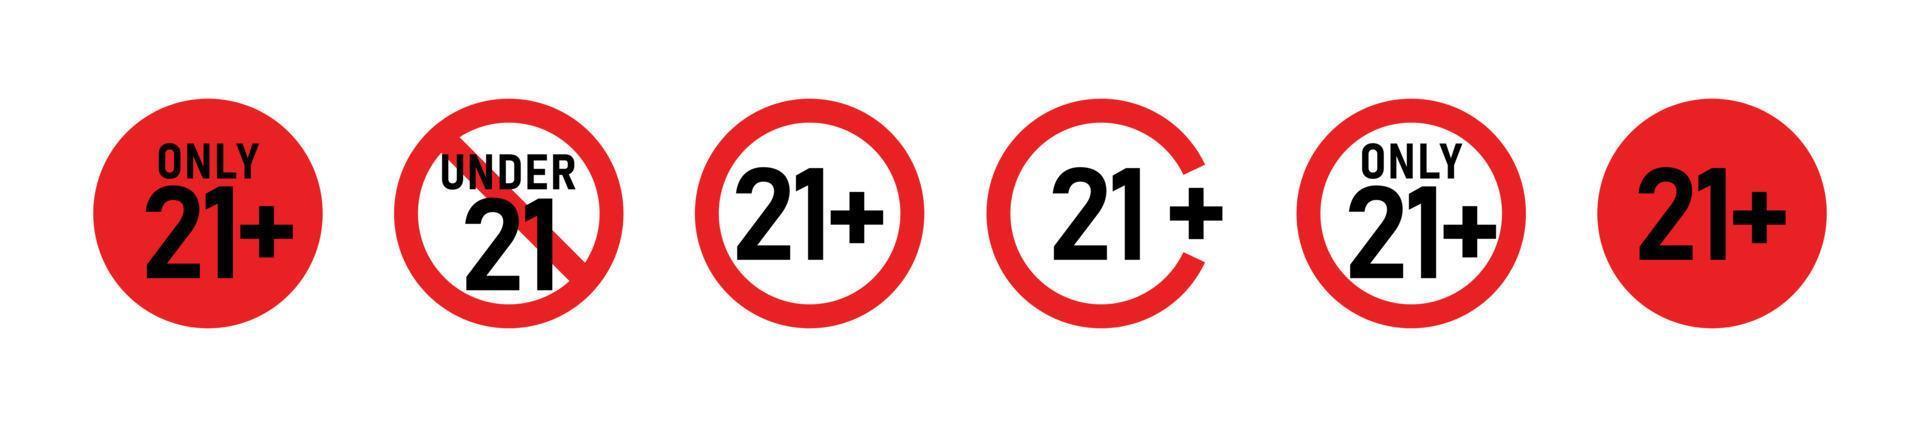 21 plus sign set. Twenty one. For adults only. Age restrictions, censorship. Icon for content, movies, alcohol, clubs and bars. vector